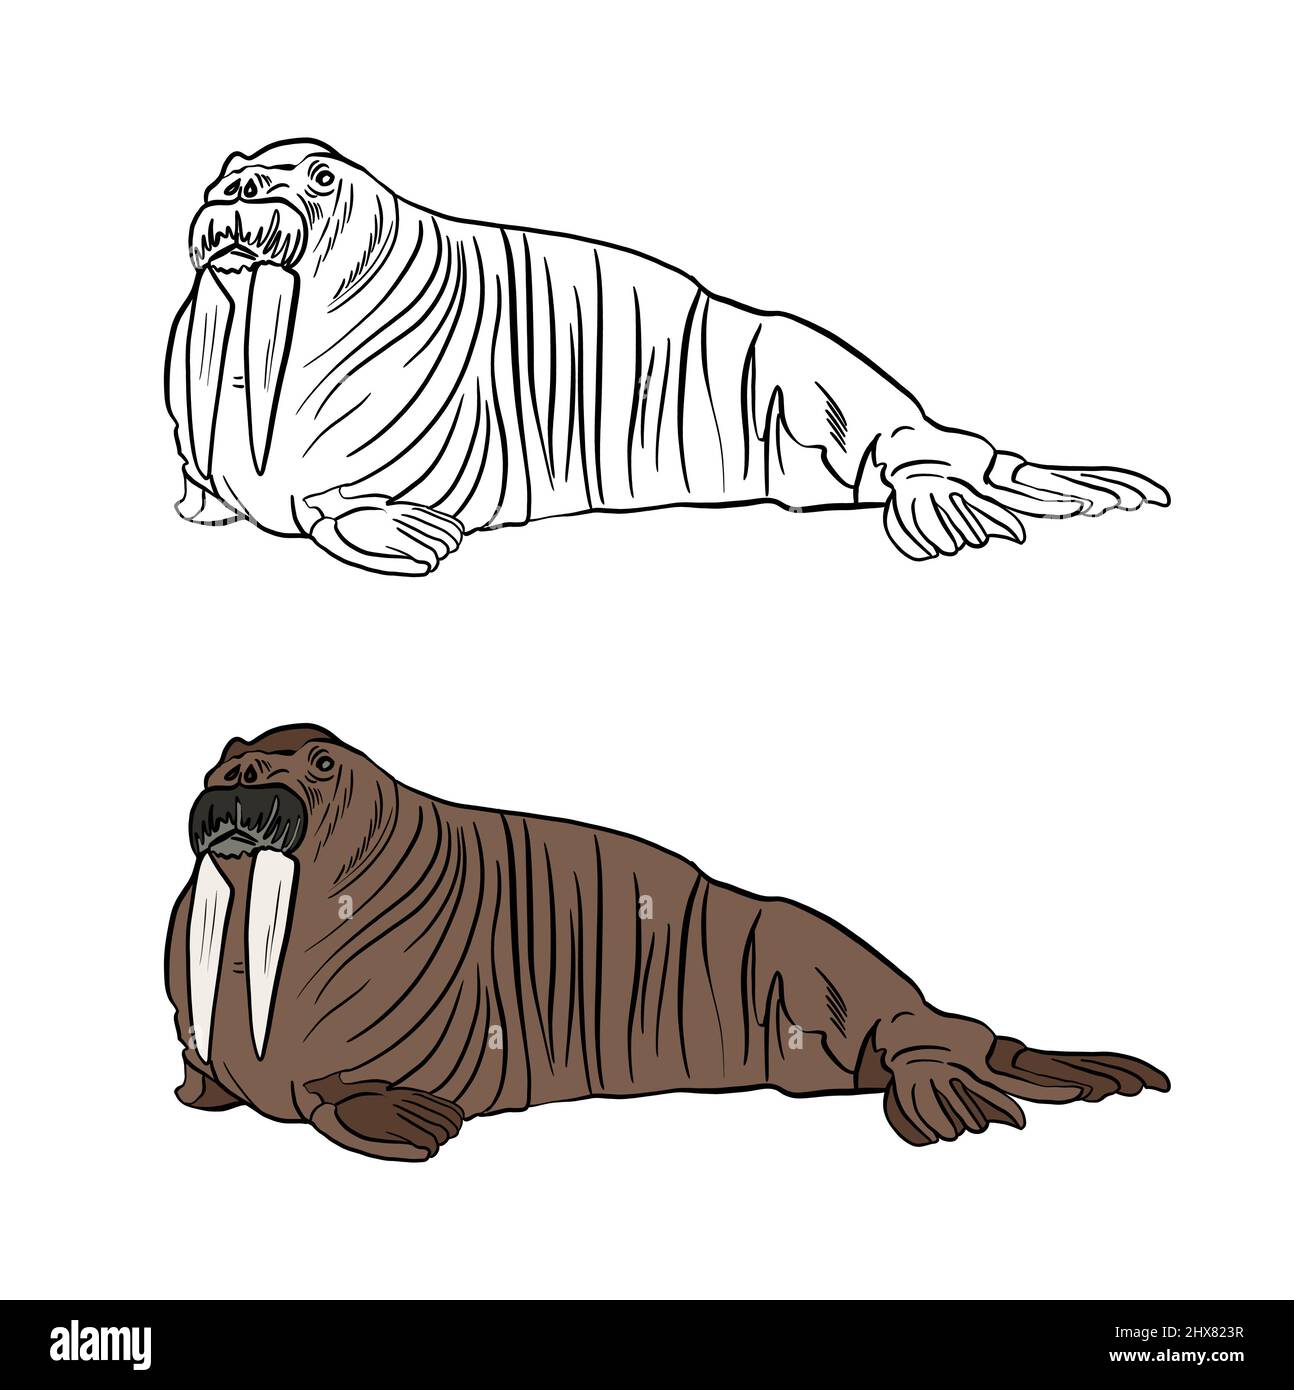 Illustration for a coloring book in color and black and white. Drawing of a walrus with tusks on a white isolated background. High quality illustration Stock Photo